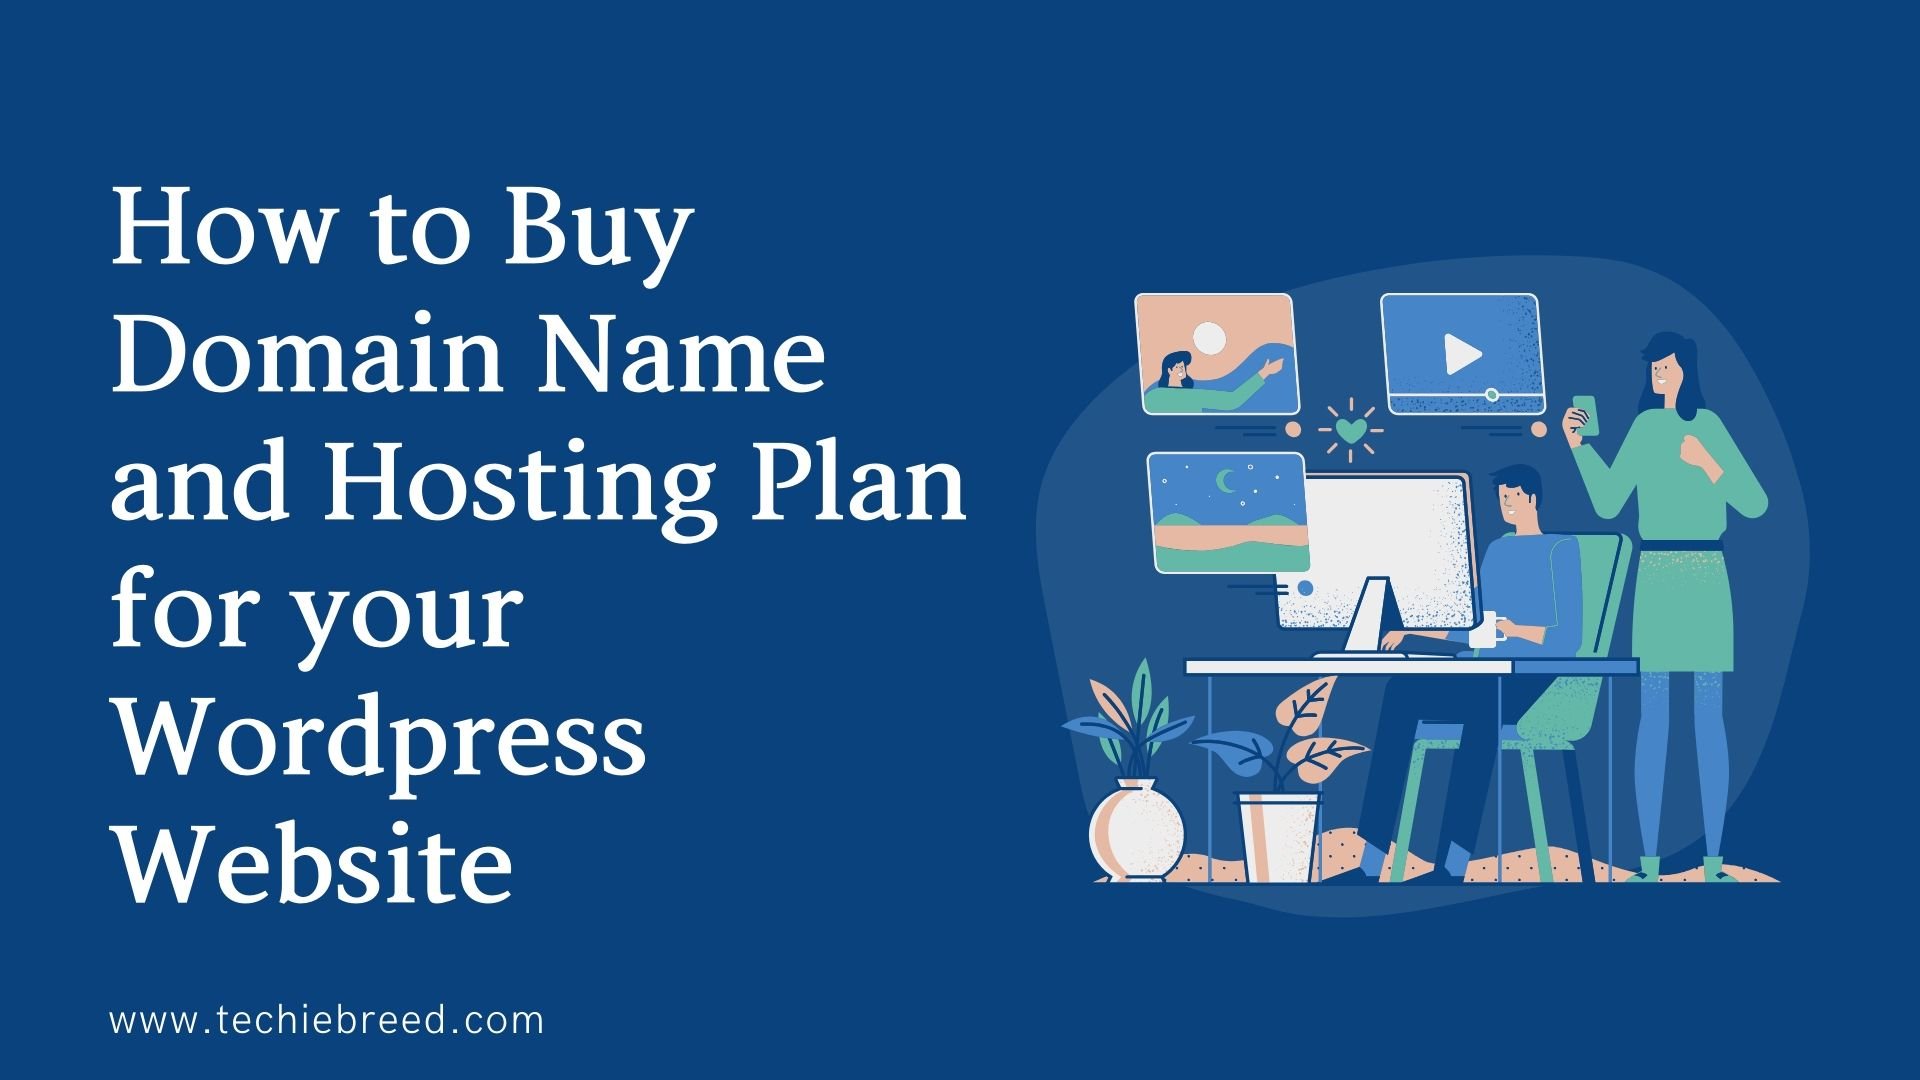 How to Buy a Domain Name and Hosting Plan for your WordPress Website ...